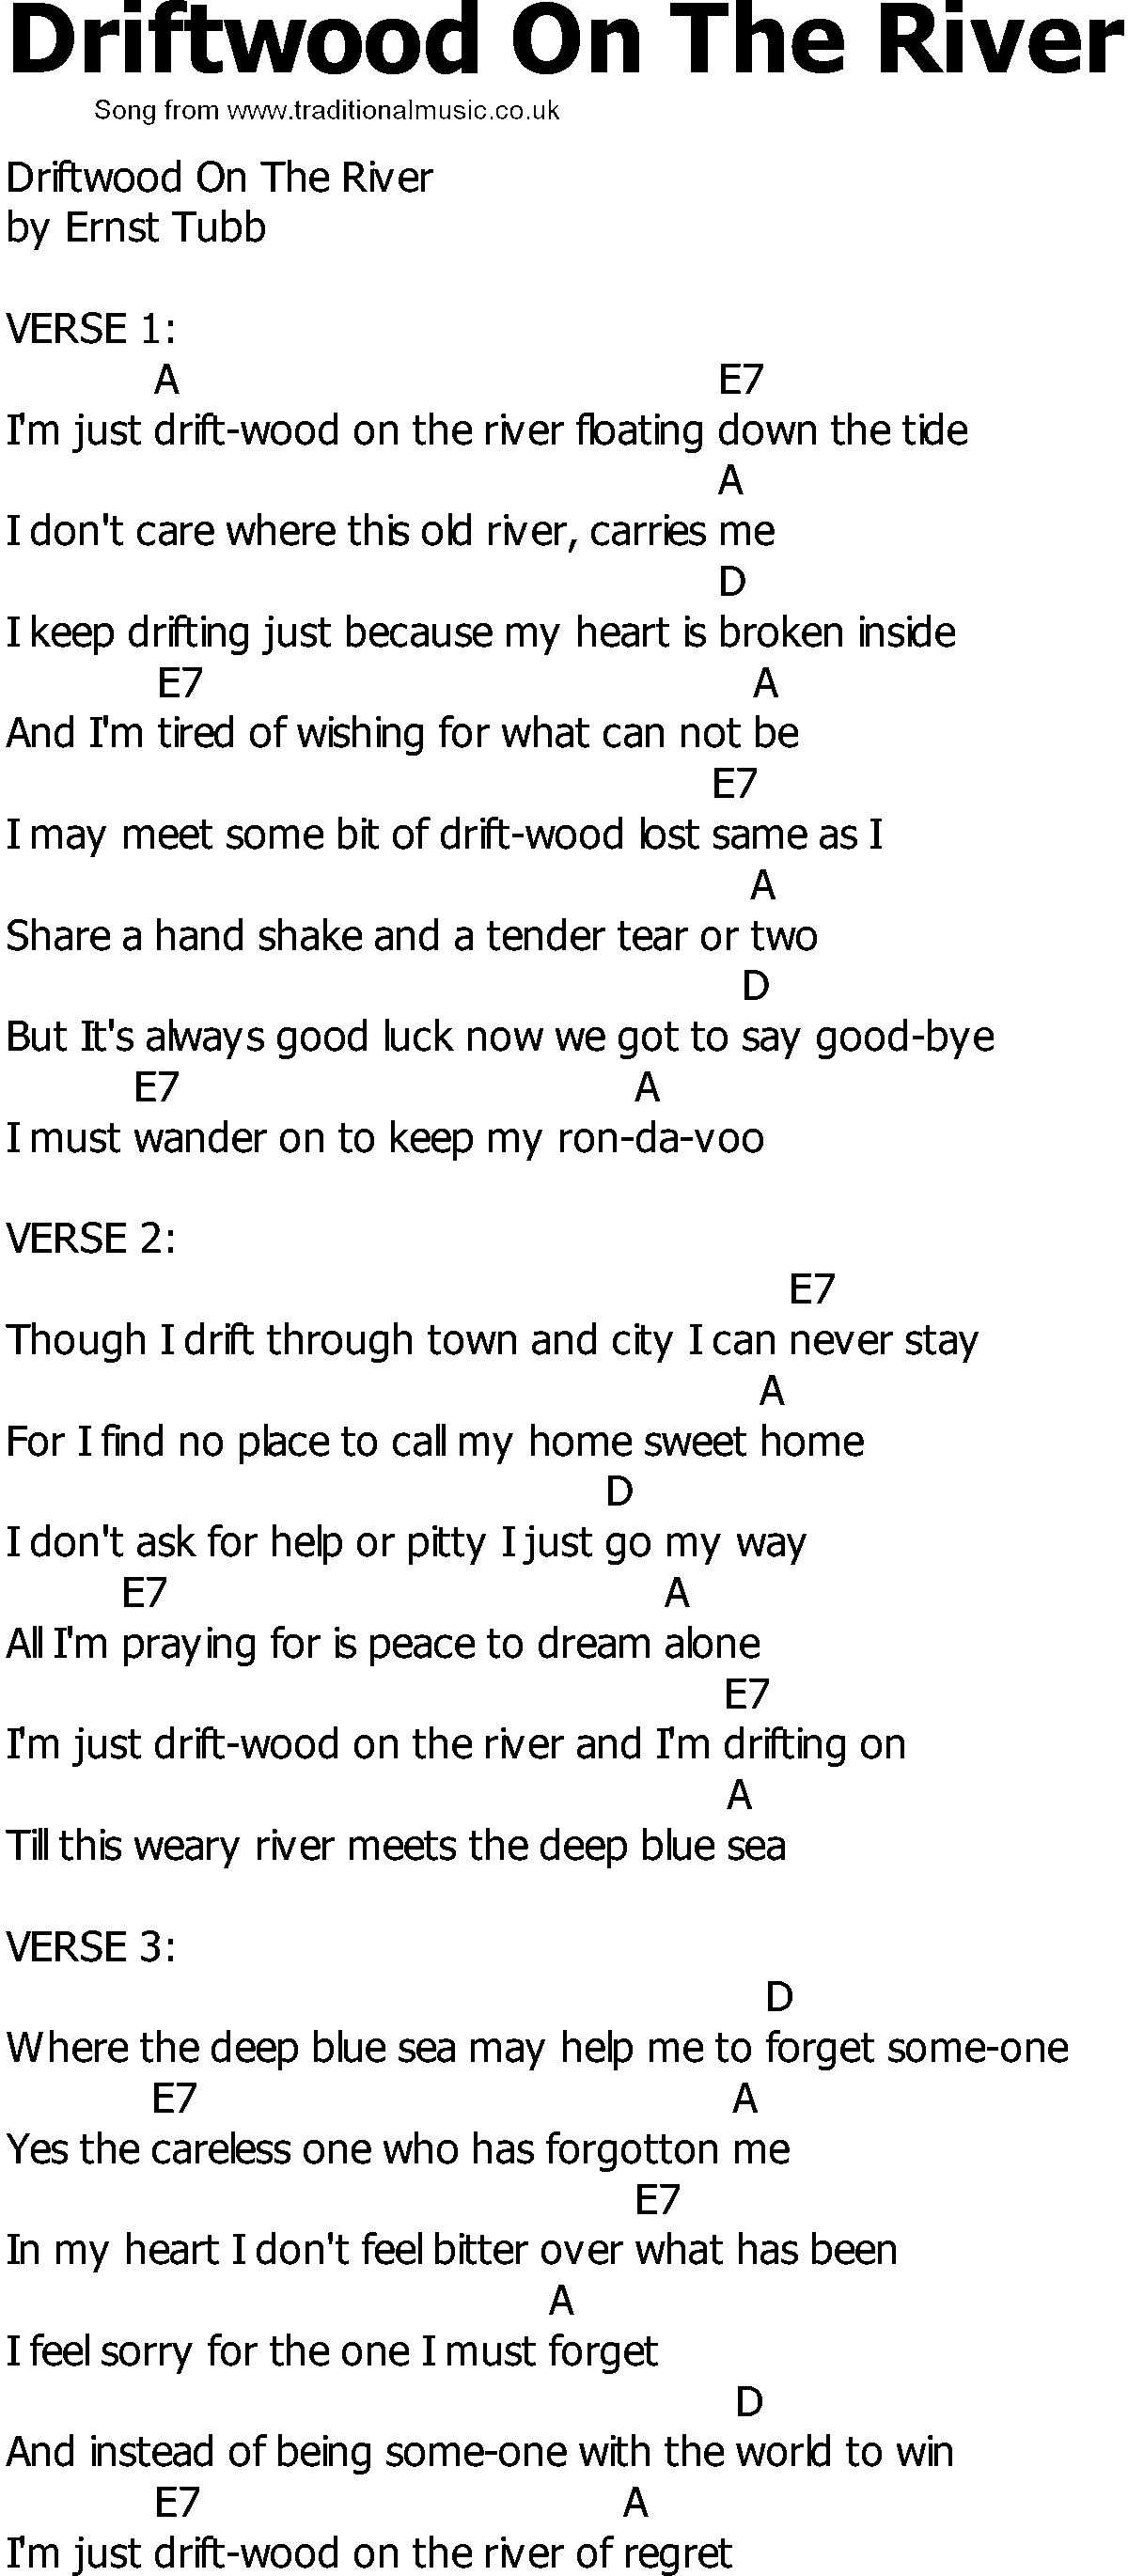 Old Country song lyrics with chords - Driftwood On The River